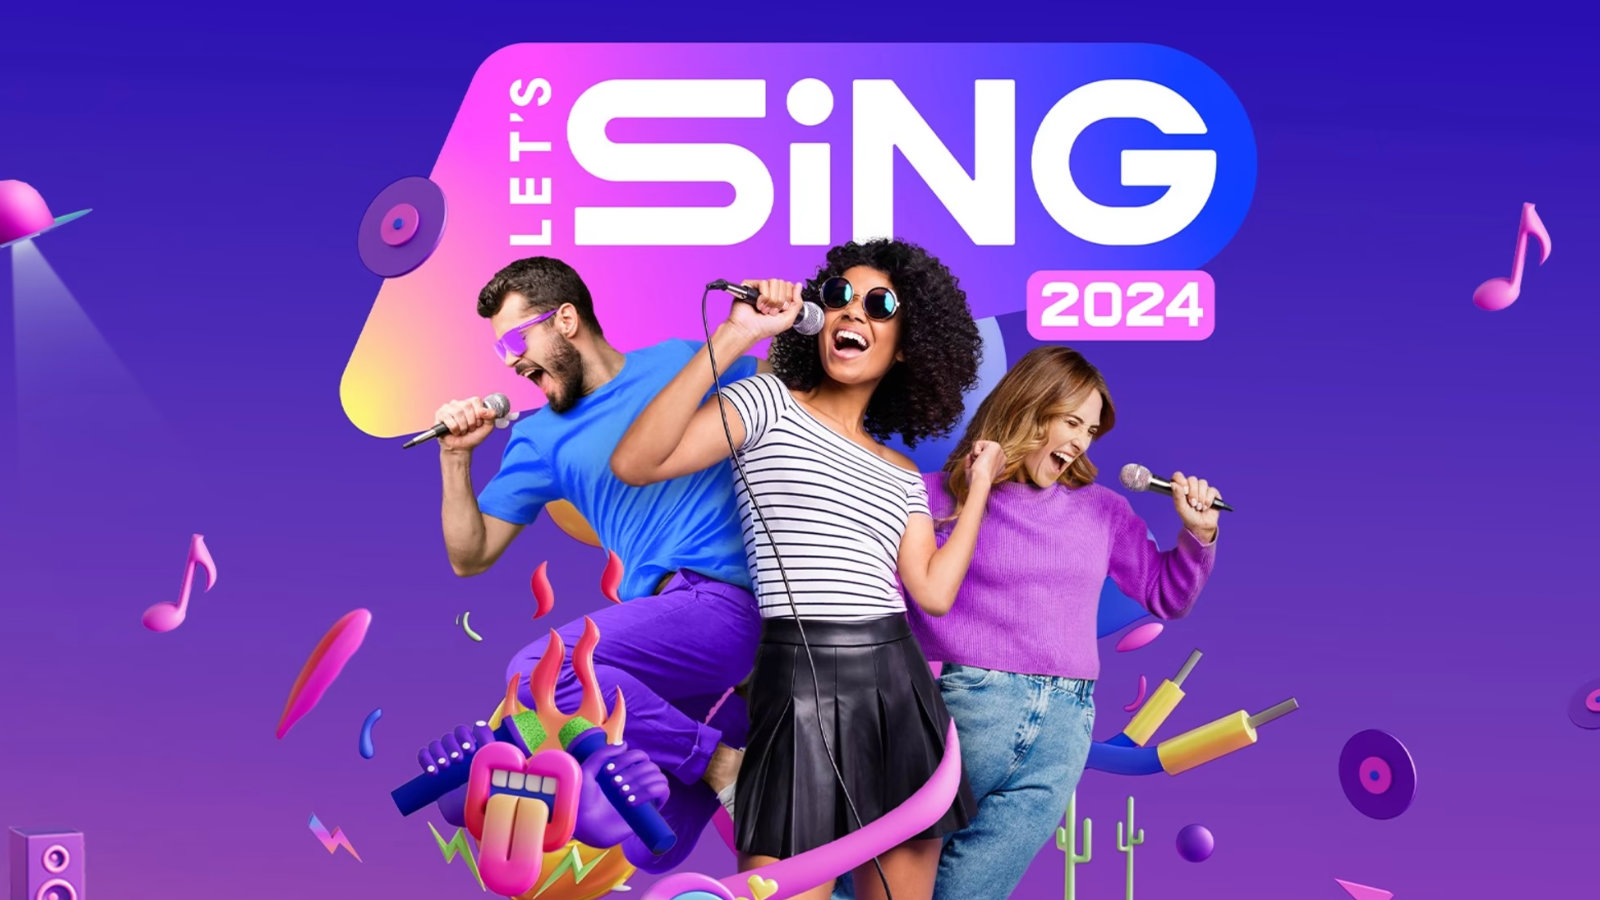 Let's Sing 2022 - Sony PlayStation 5 - Musikk